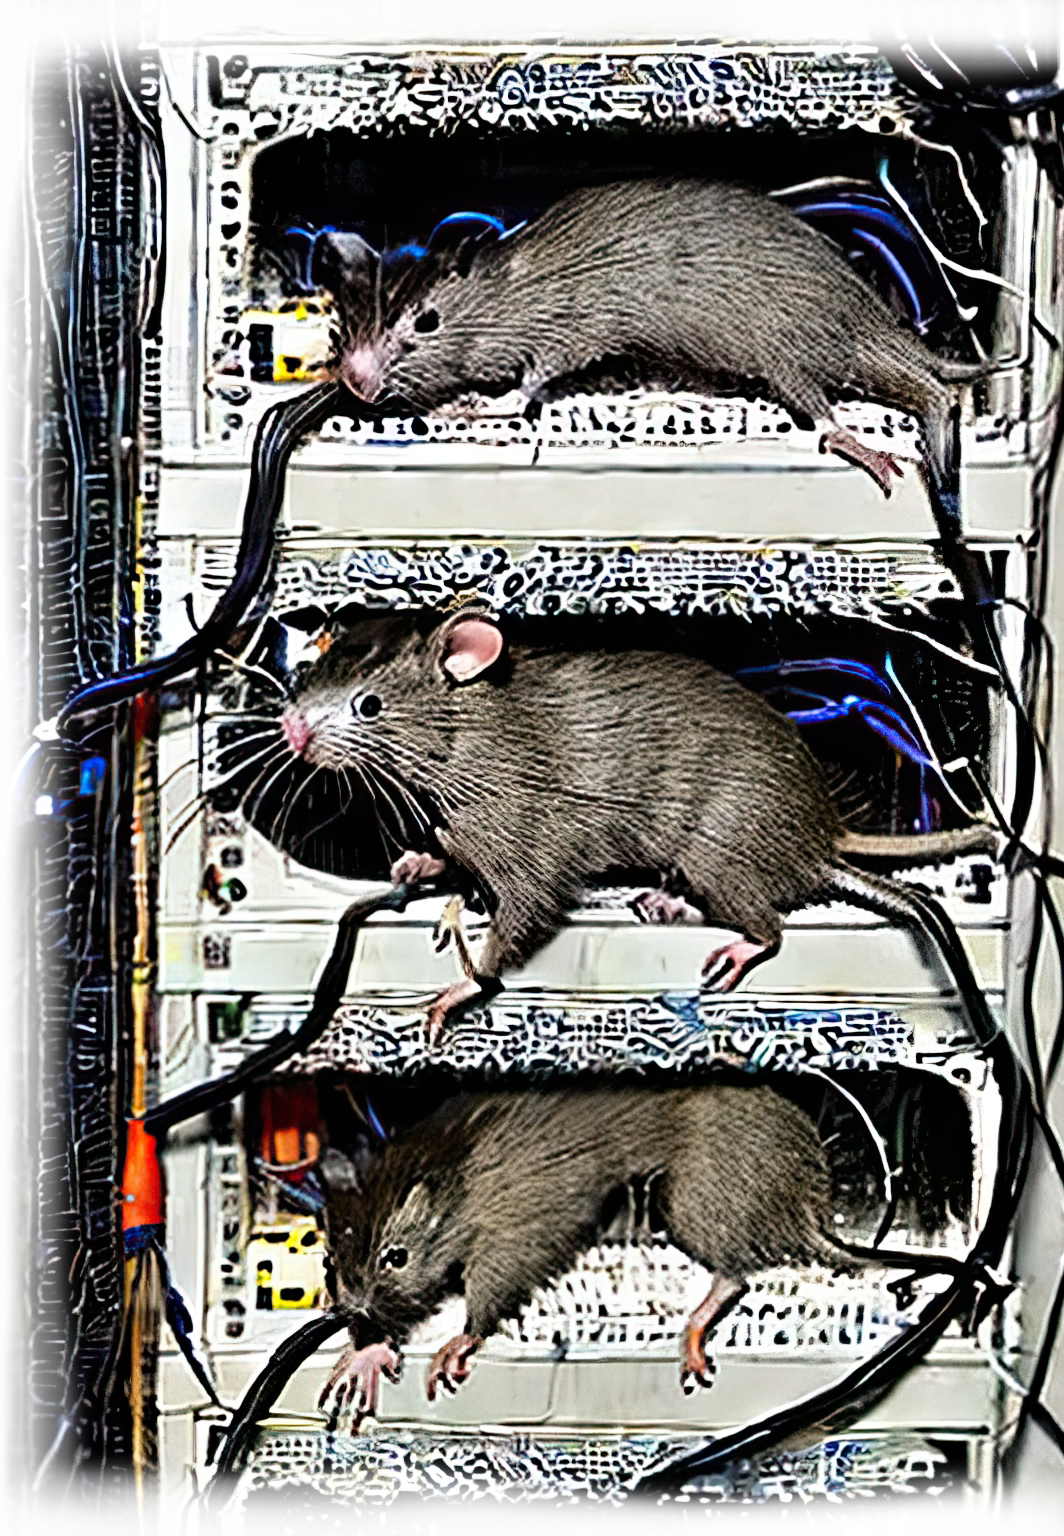 AI image prompt: internet server room swarming with rats